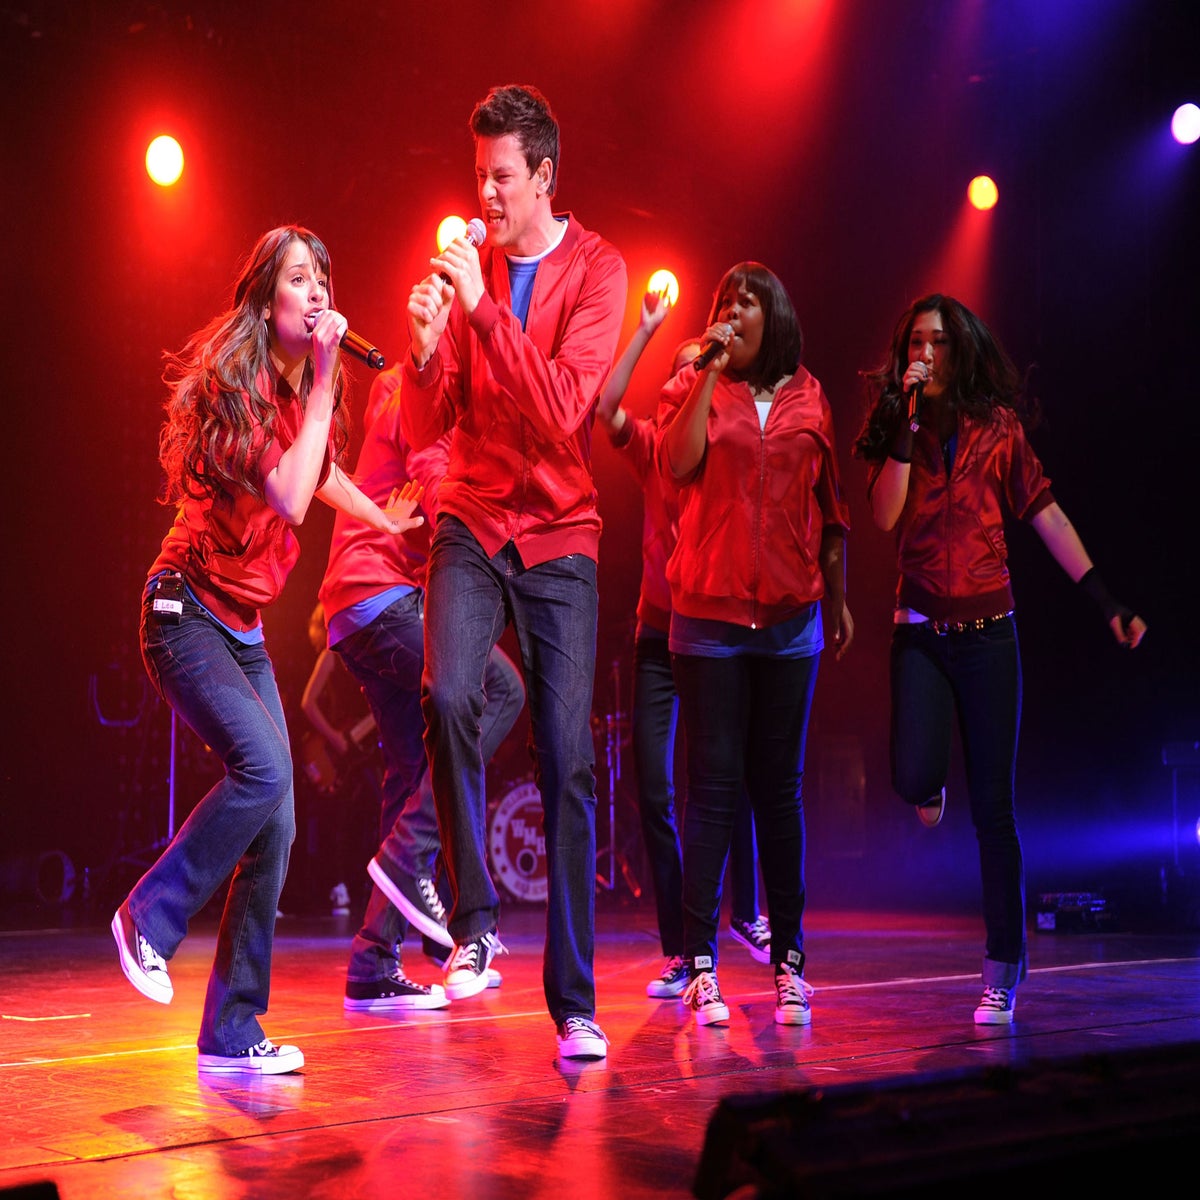 Watch Cory Monteith's 15 best 'Glee' performances